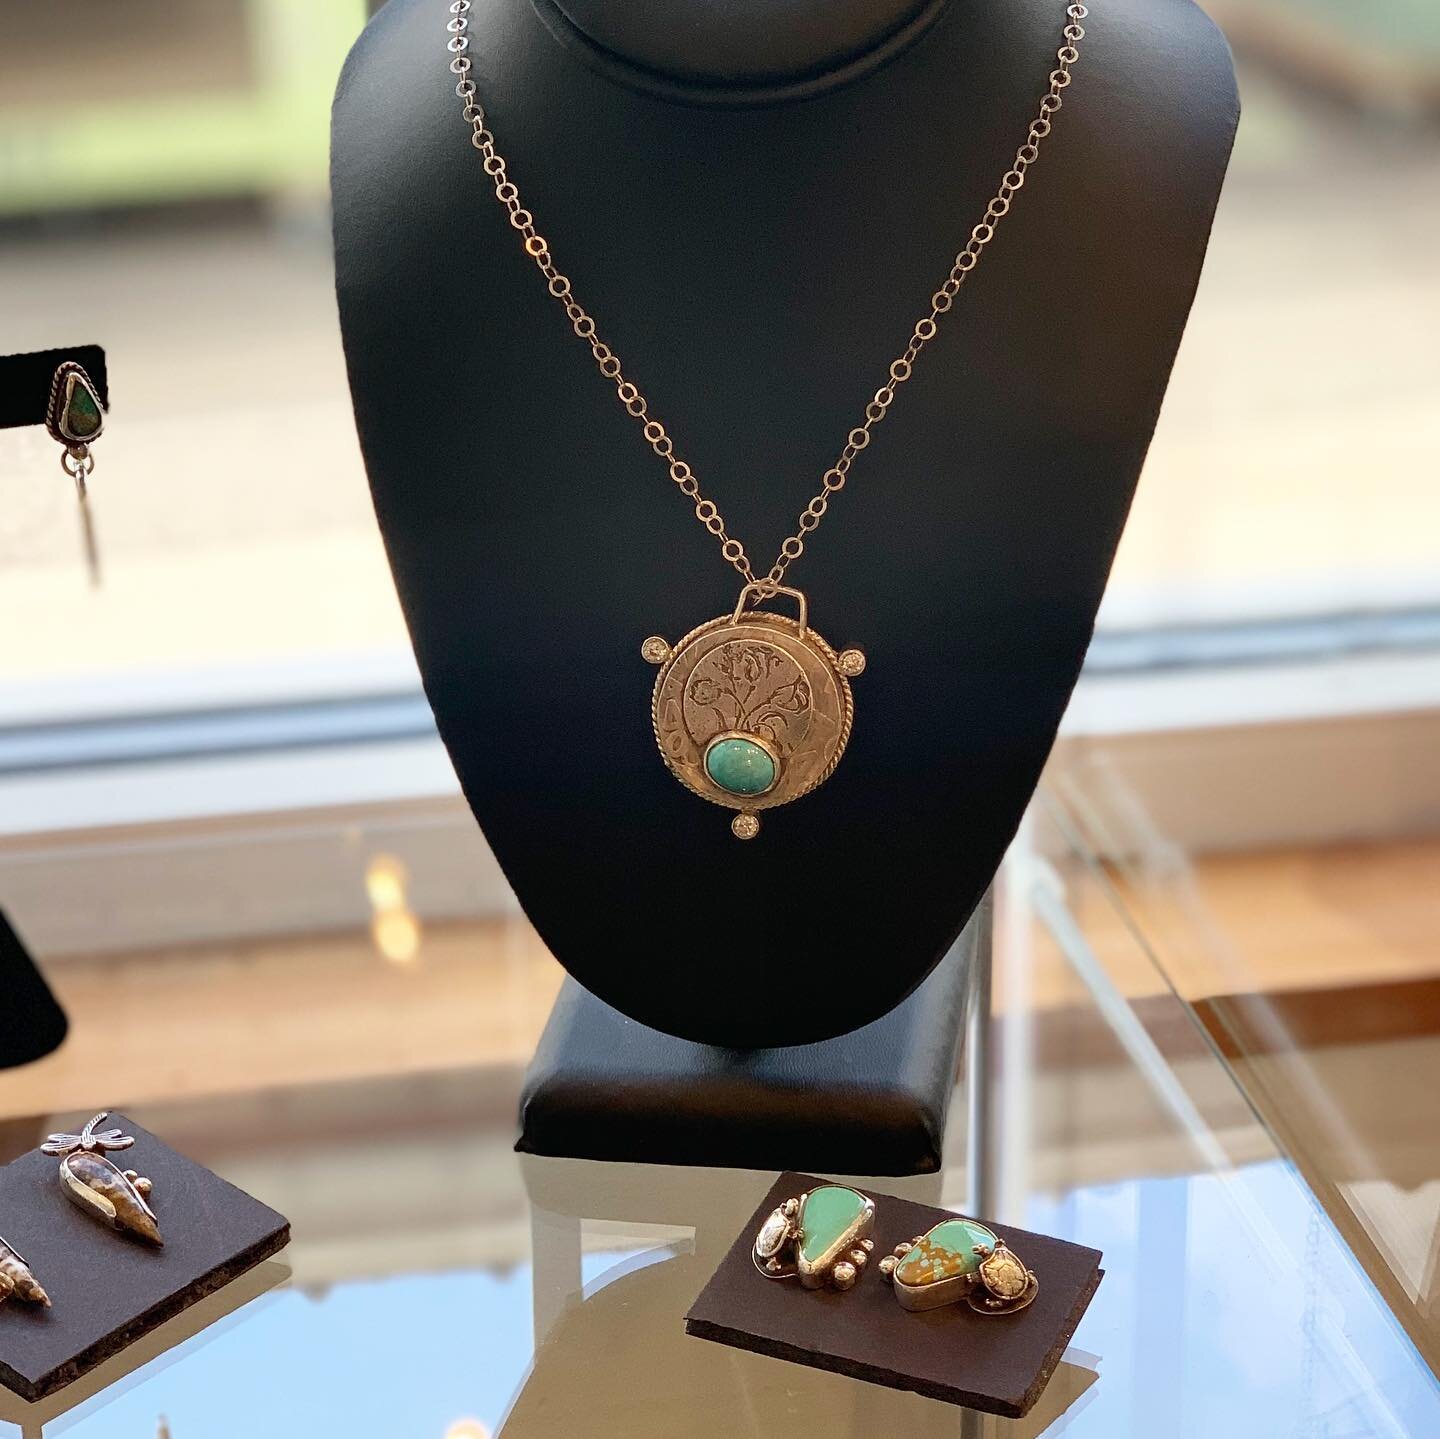 A few gorgeous pieces by Robert Turner of Madison, VA. Robert works with sterling silver and many different kinds of stones and handmade glass beads. Come try these wearable sculptures on!
.
.
.
#jewelrydesign #wearableart #handcraftedjewelry